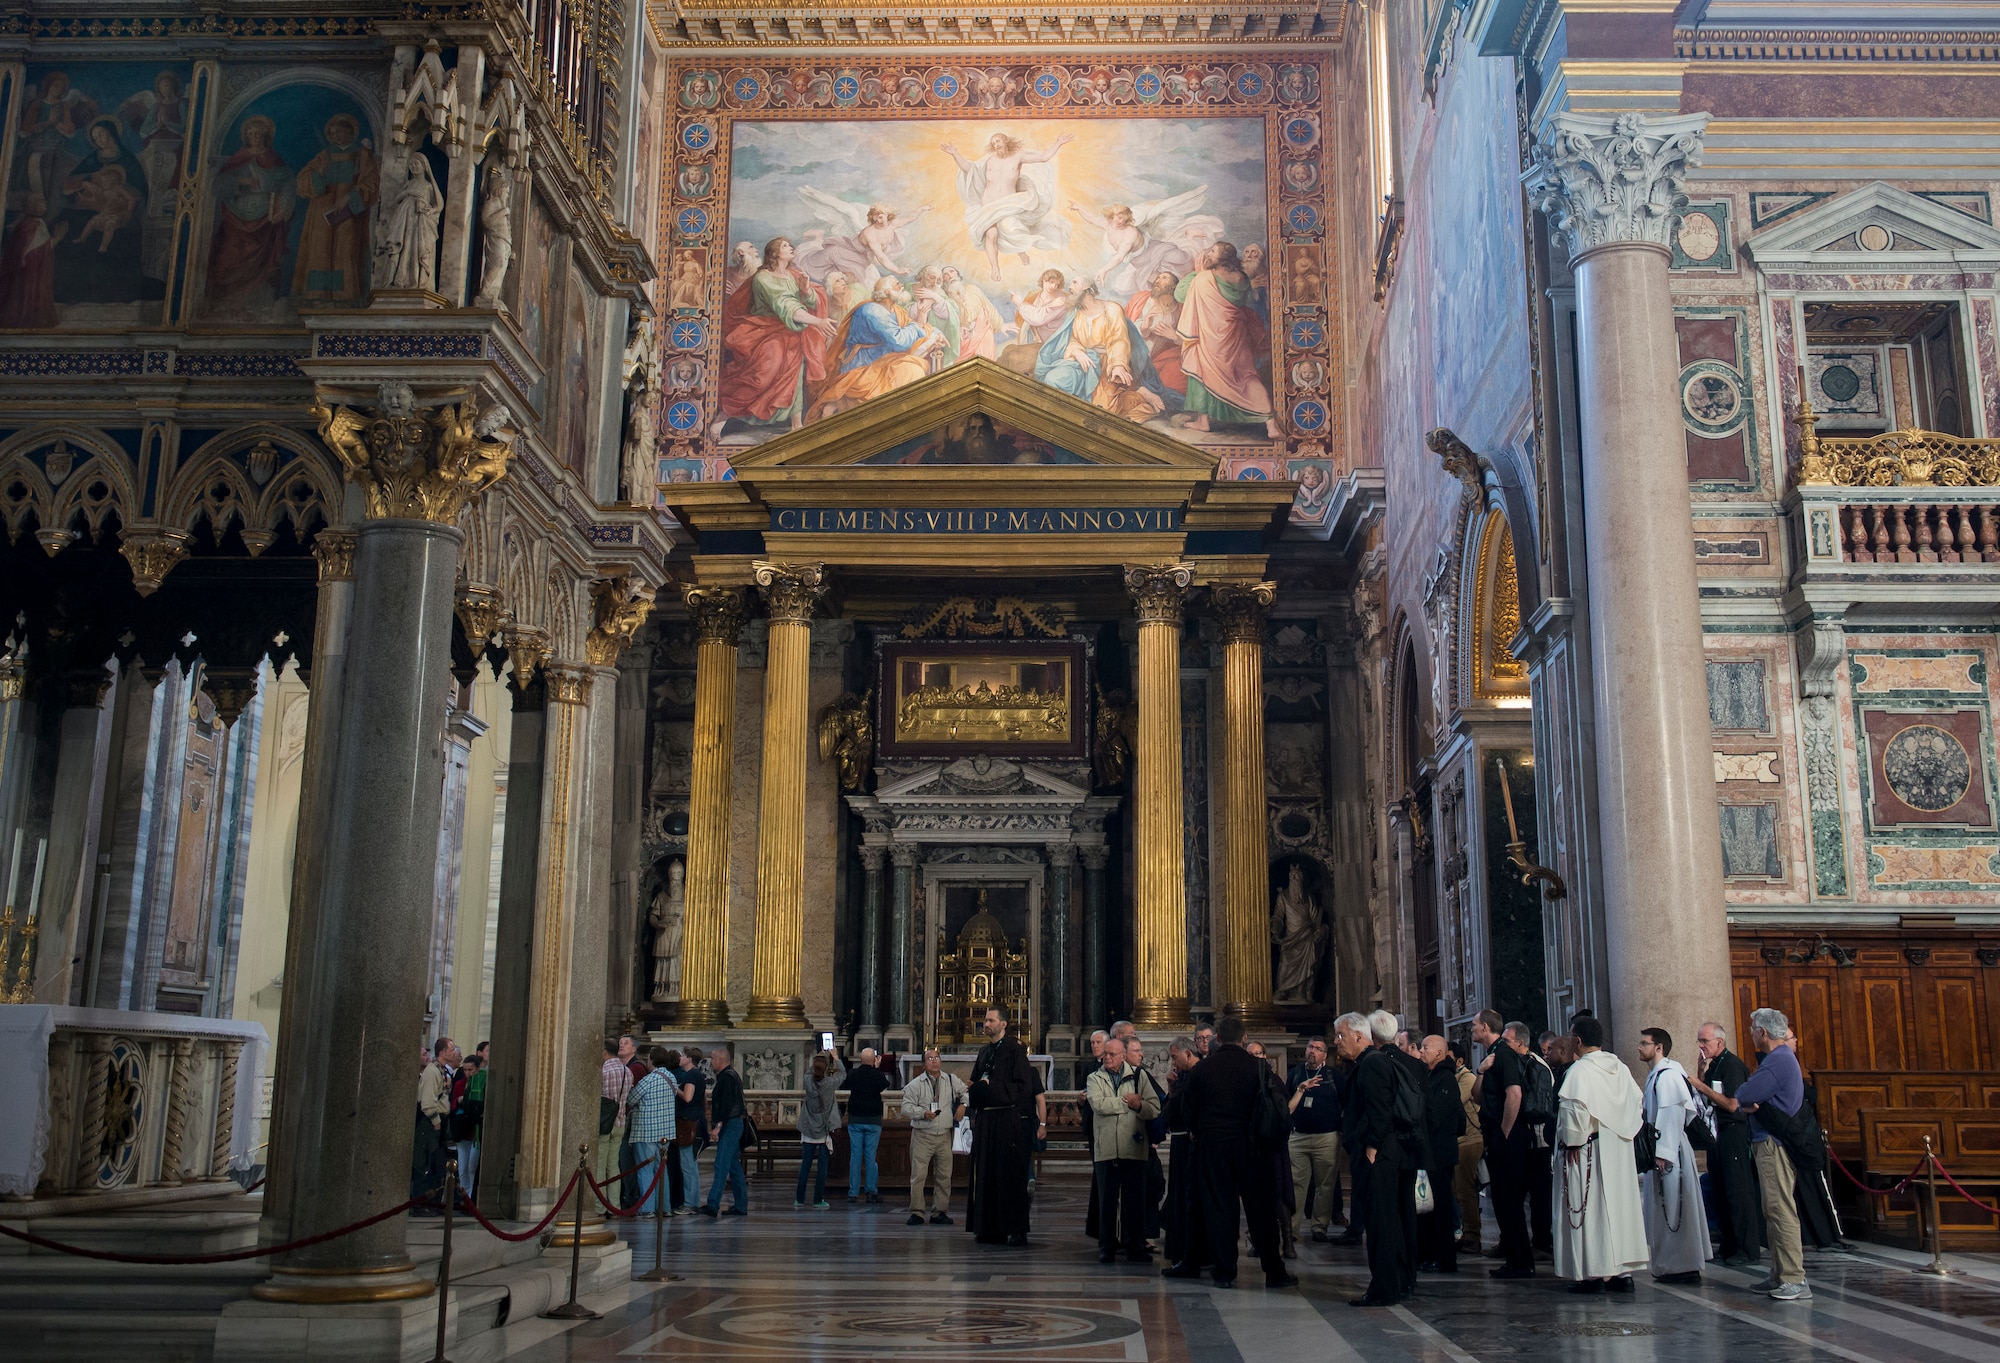 Retired Chaplain (Lt. Col.) Robert Bruno, along with the other participants of his sabbatical program, take a tour of the St. Peter's Basilica in Rome. The sabbatical program allows the participants the opportunity to see and learn the religious history of Rome. St. Peter's is the most renowned work of Renaissance architecture and remains one of the largest churches in the world. (U.S. Air Force photo/Staff Sgt. Andrew Lee)